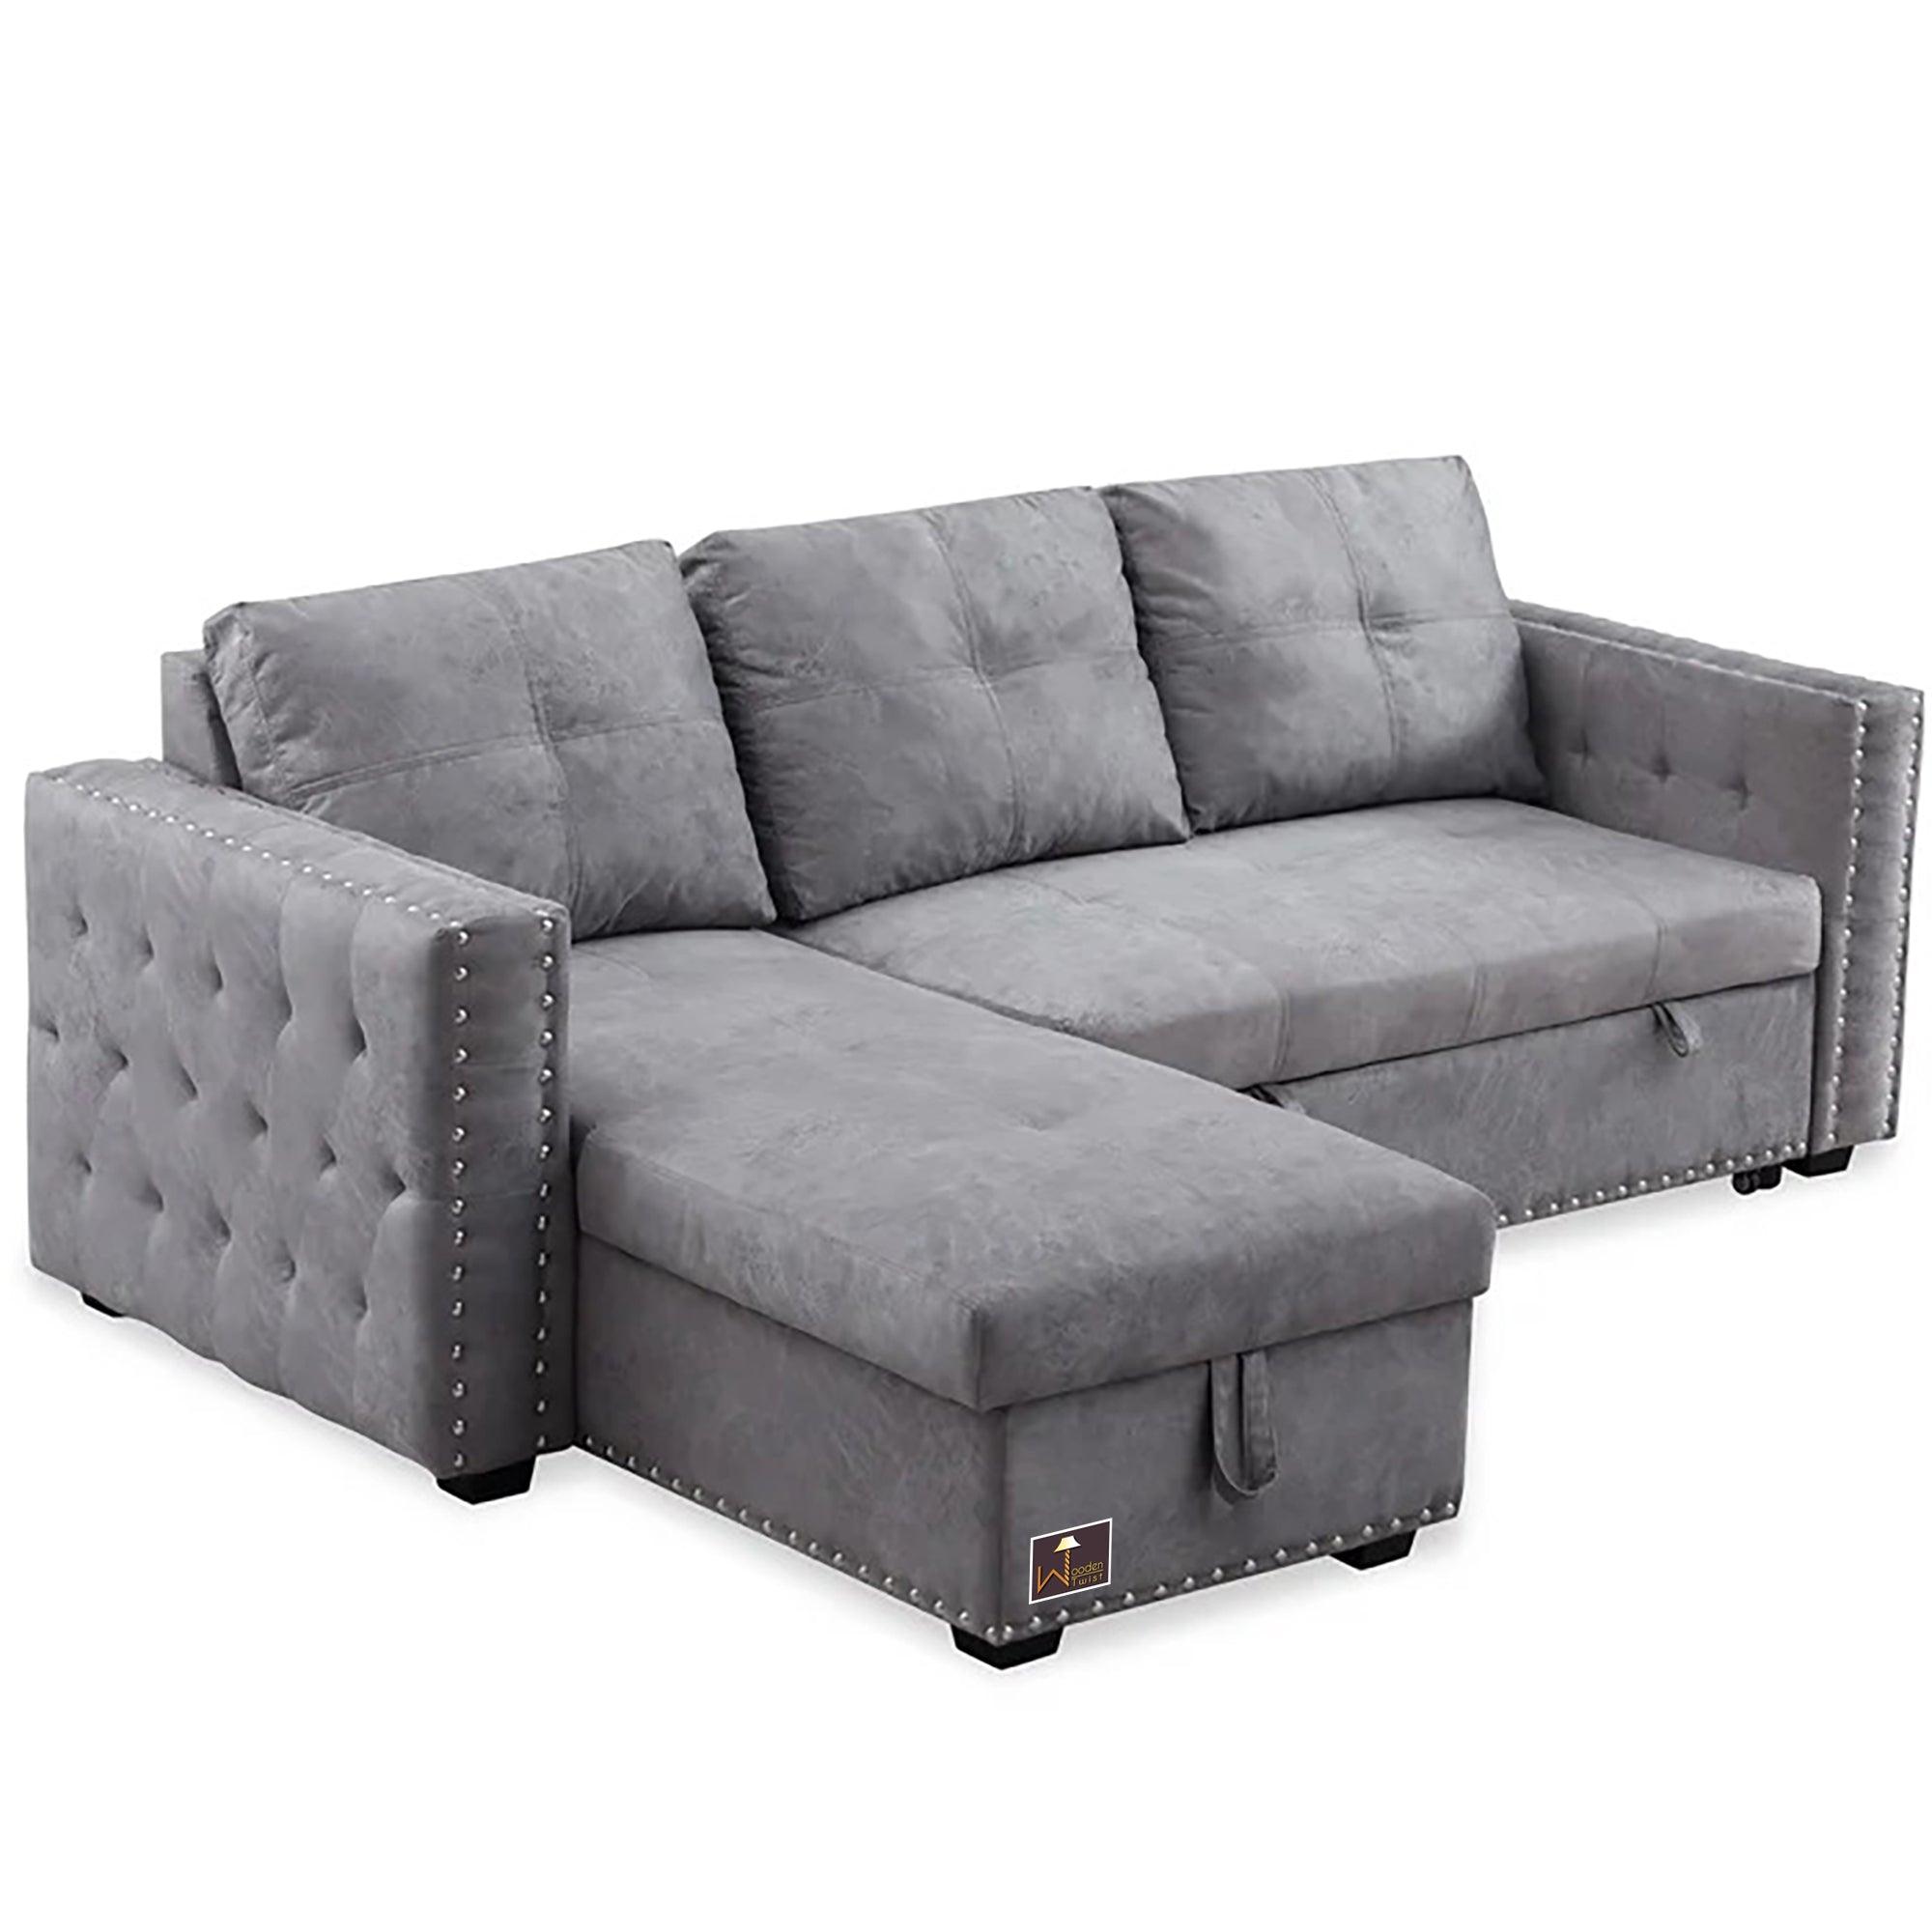 Wooden Twist Sectional Sleeper 5 Seater L Shape Sofa Bed With Comfort Cushion